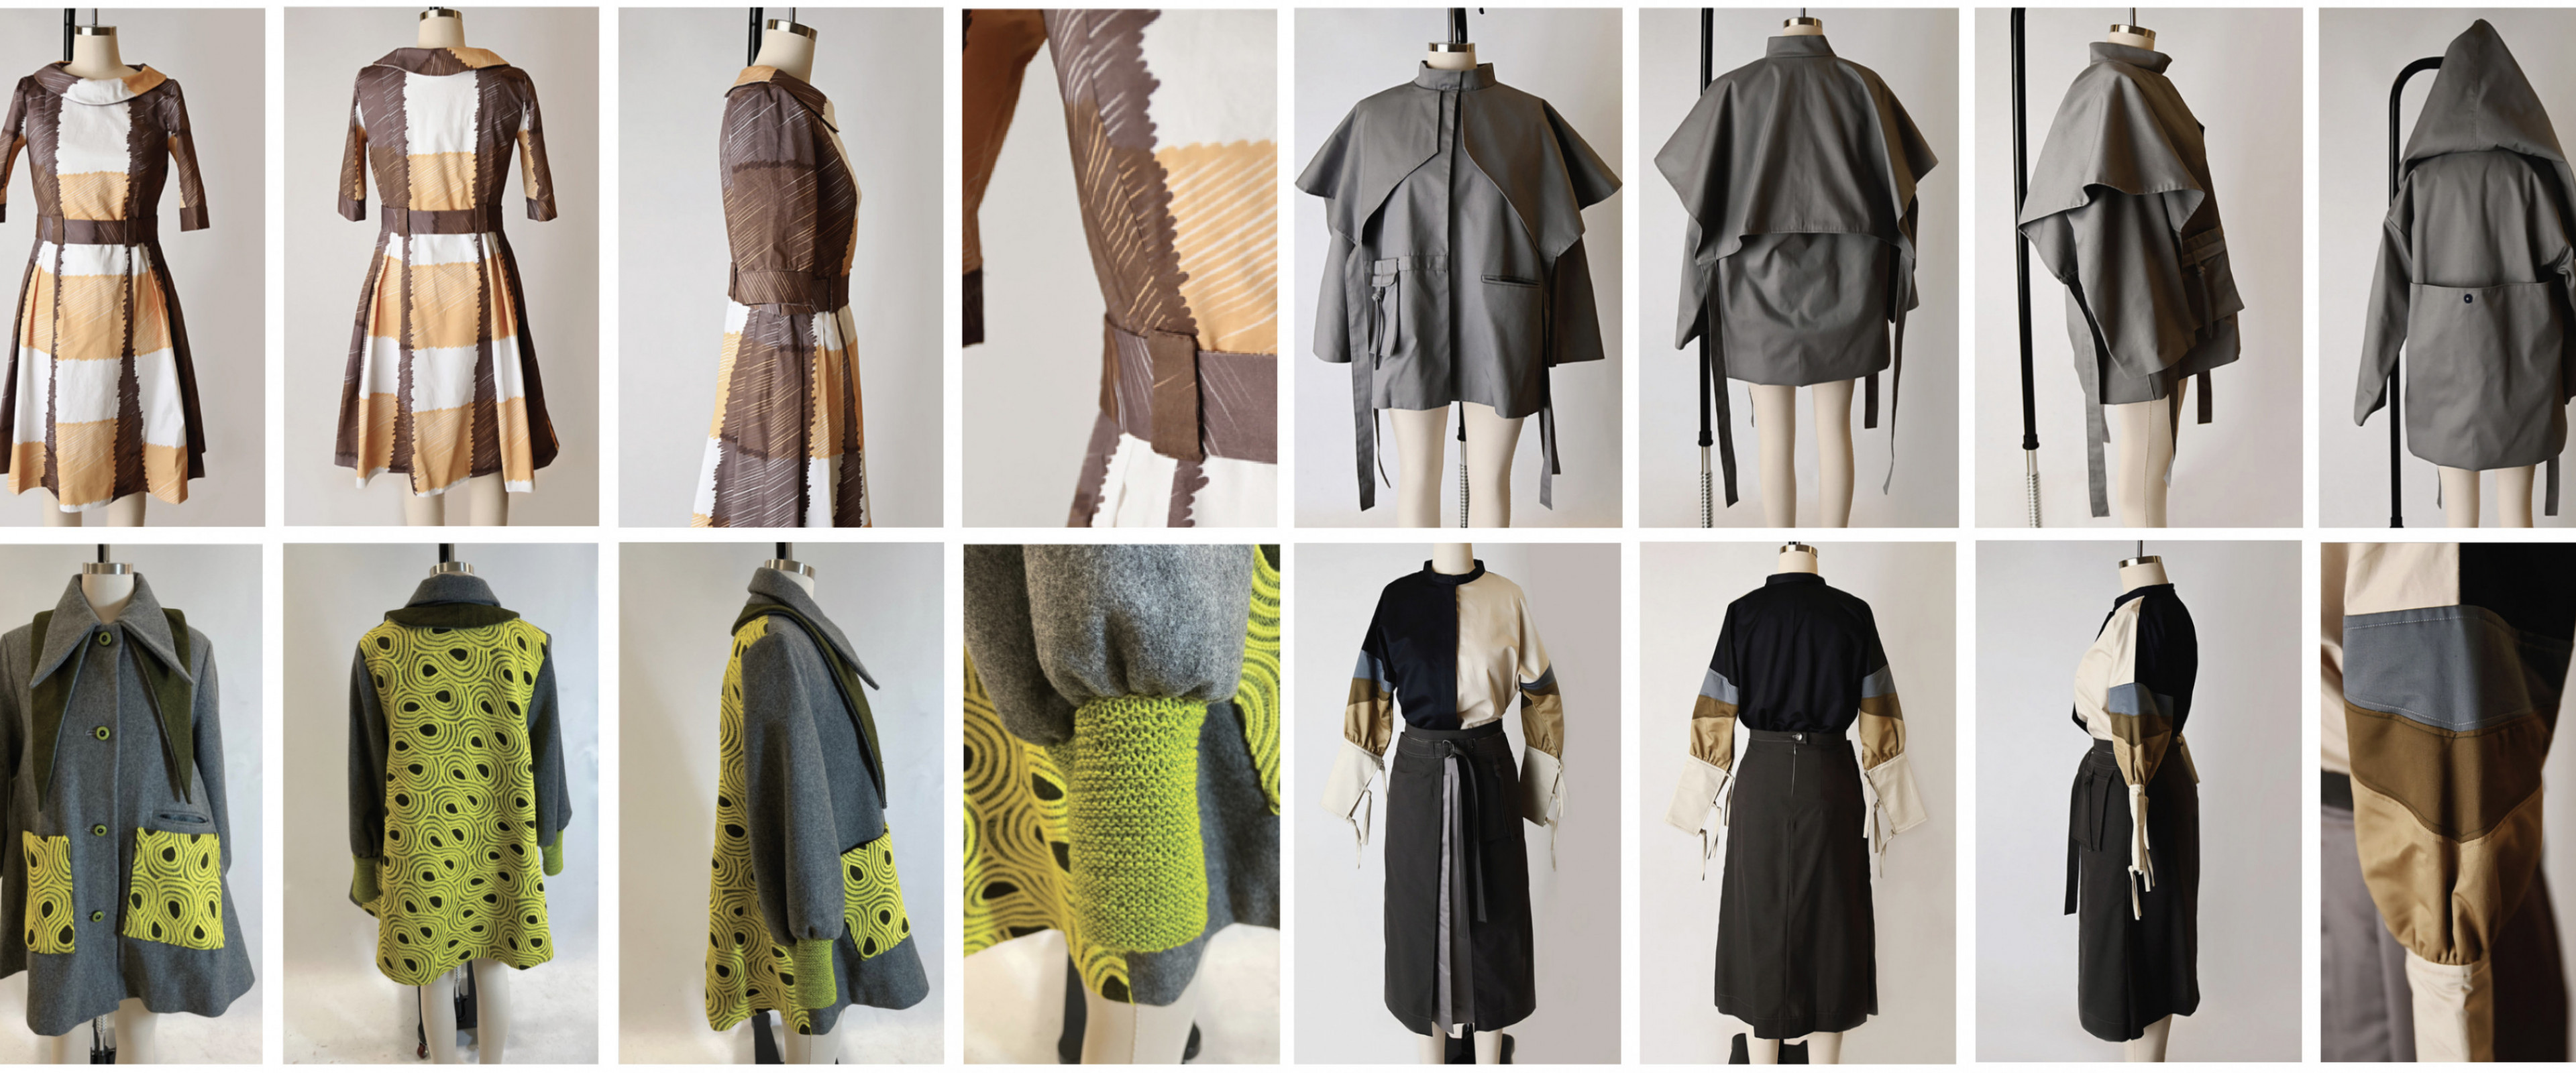 photos of clothing designed by FCS students